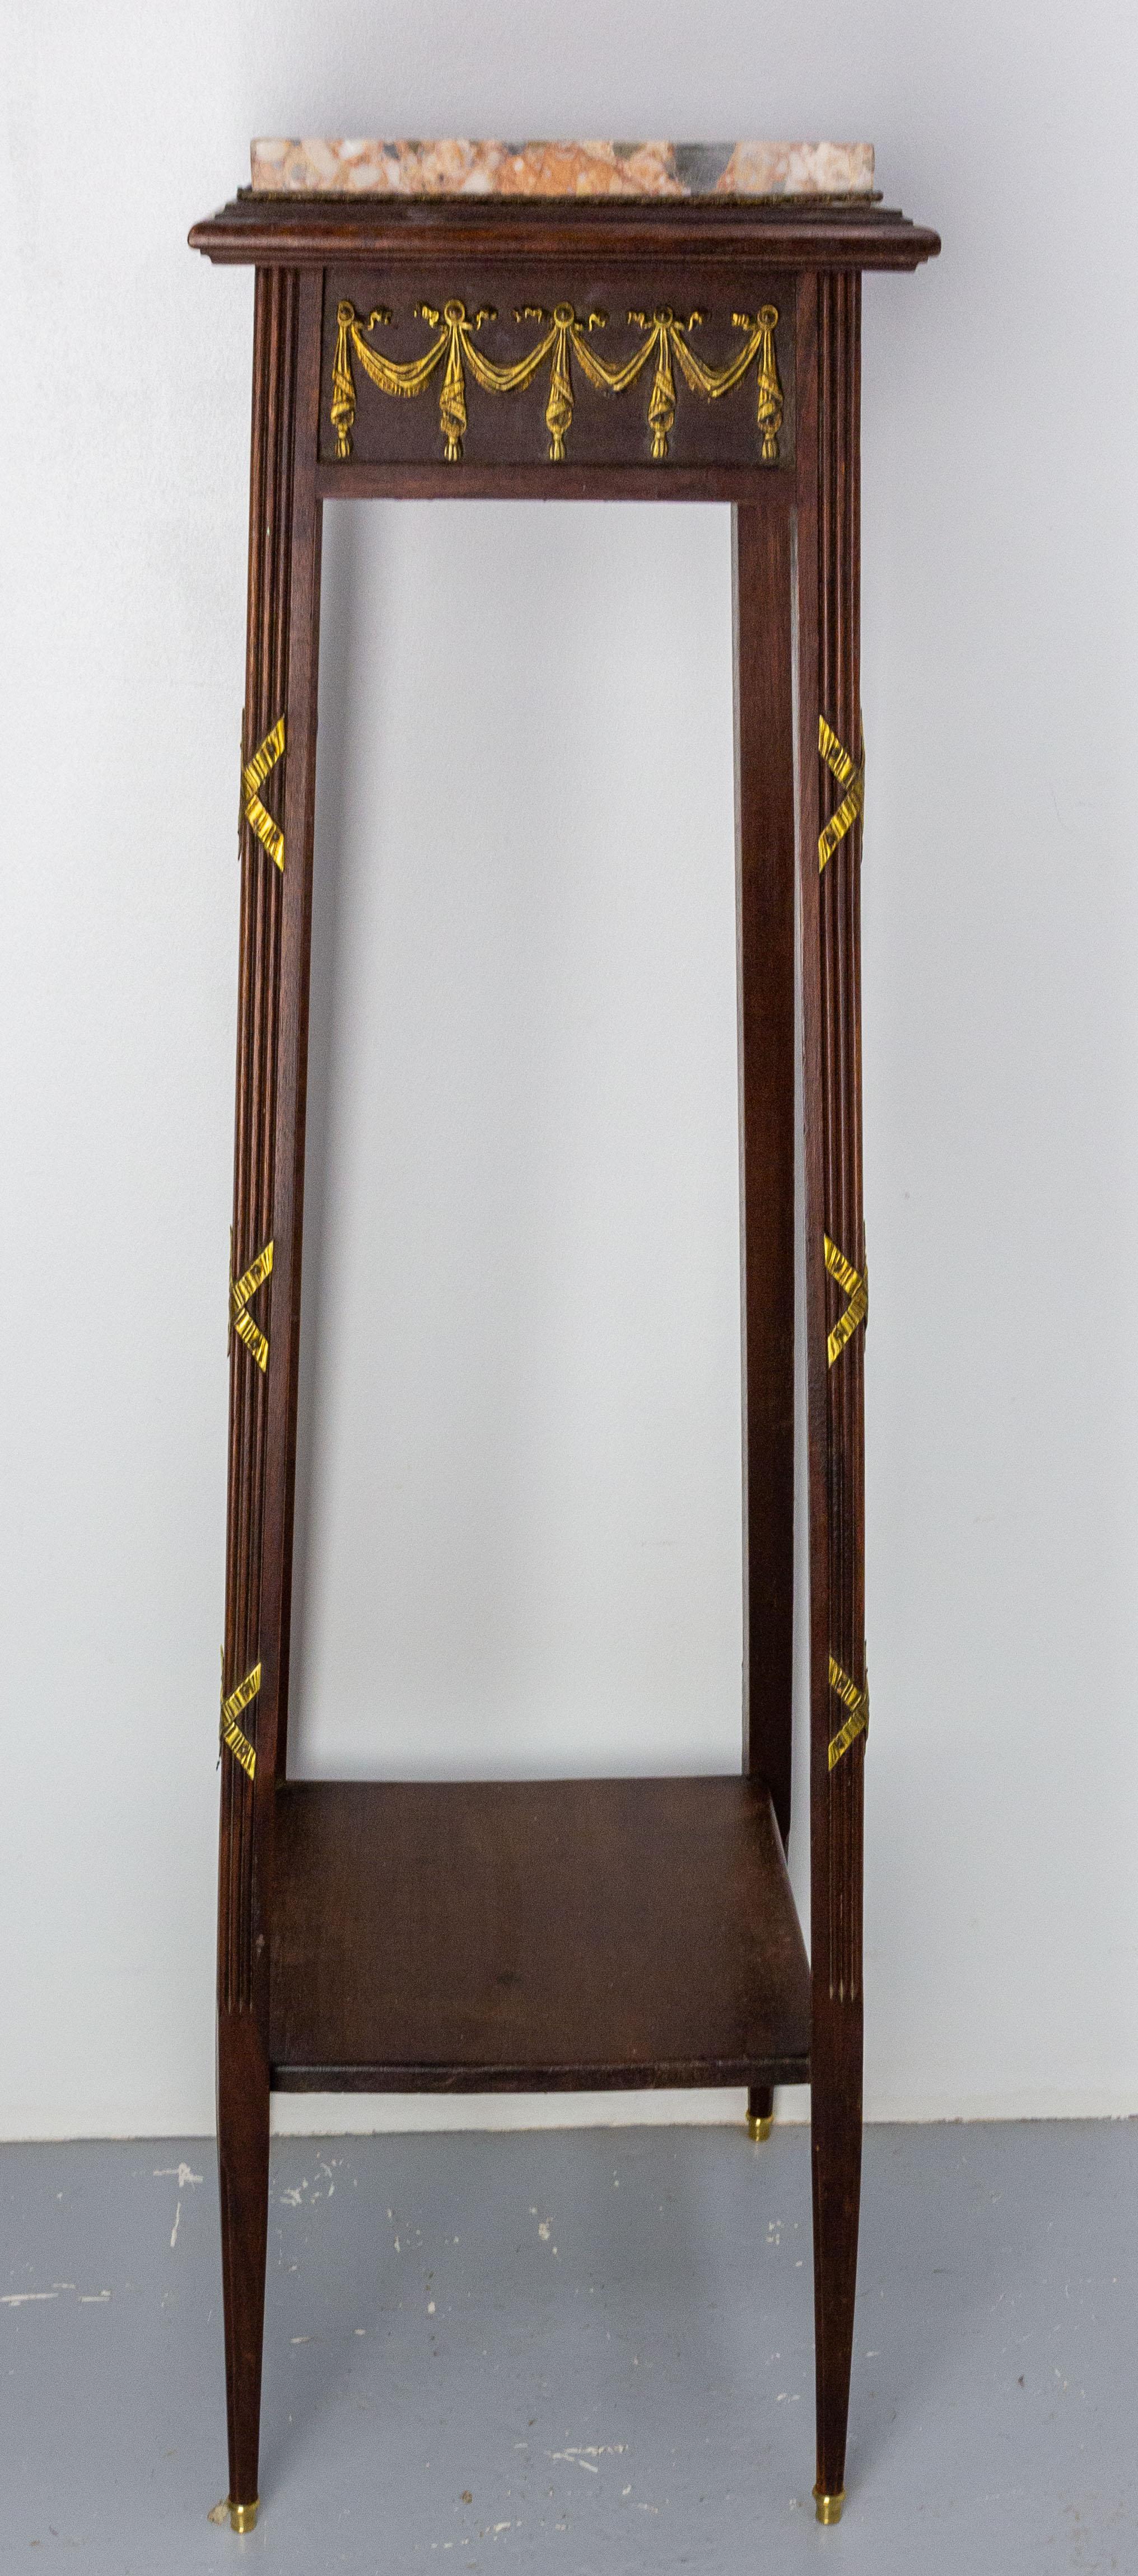 Early 20th Century French 1900 Iroko, Marble & Brass Sellette or Plant Holder Louis XVI St, c 1900 For Sale